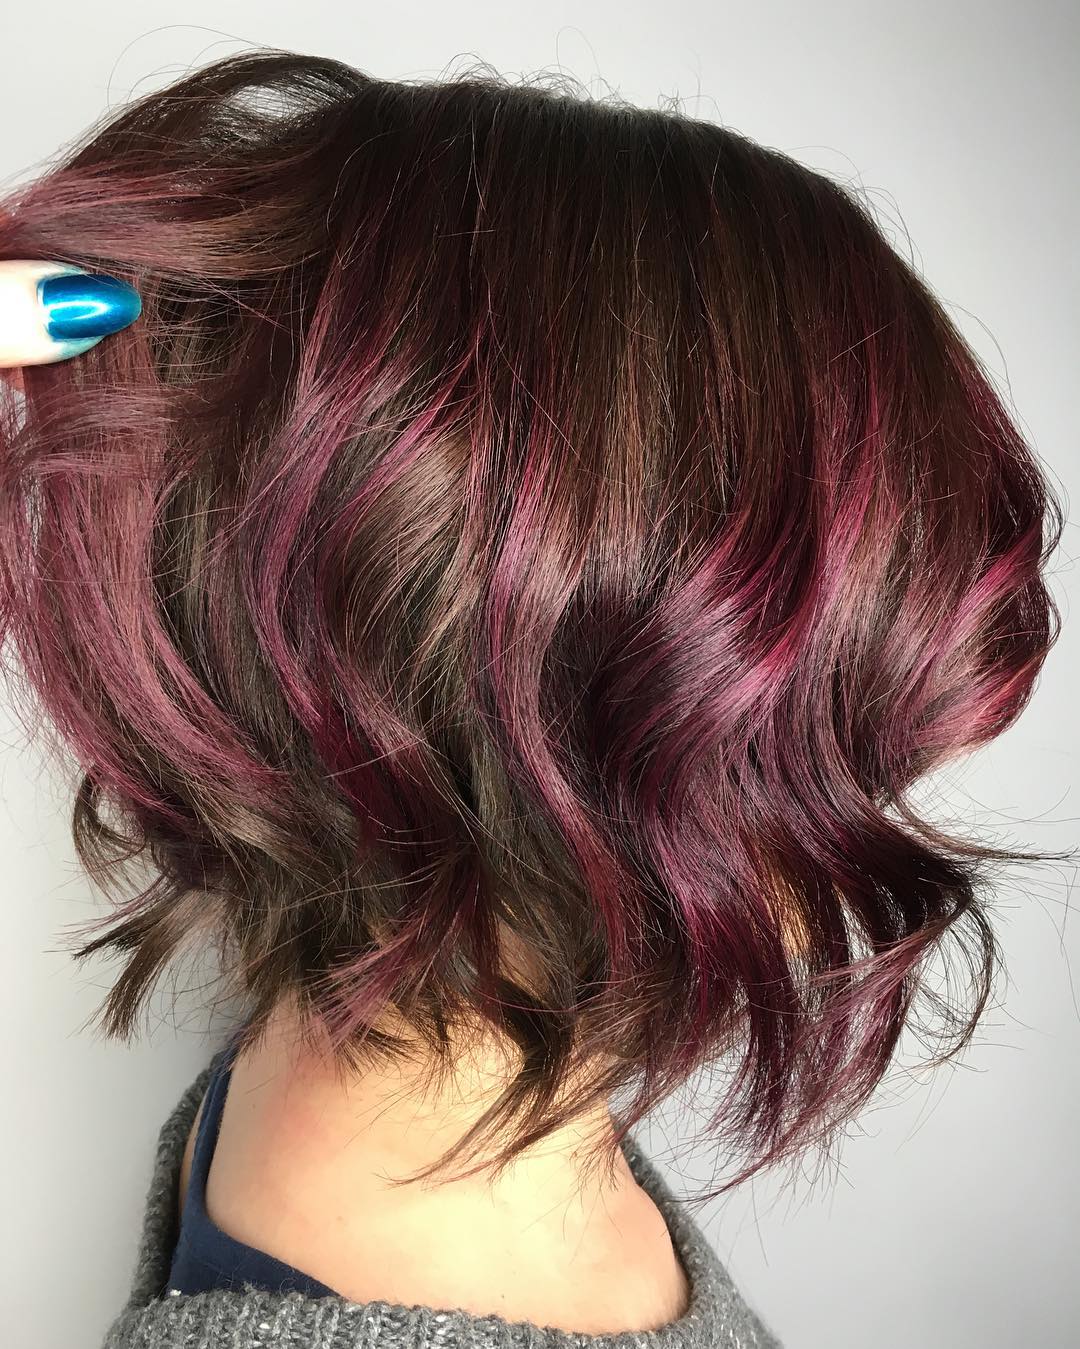 38 Super Cute Ways To Curl Your Bob Popular Haircuts For Women 2020